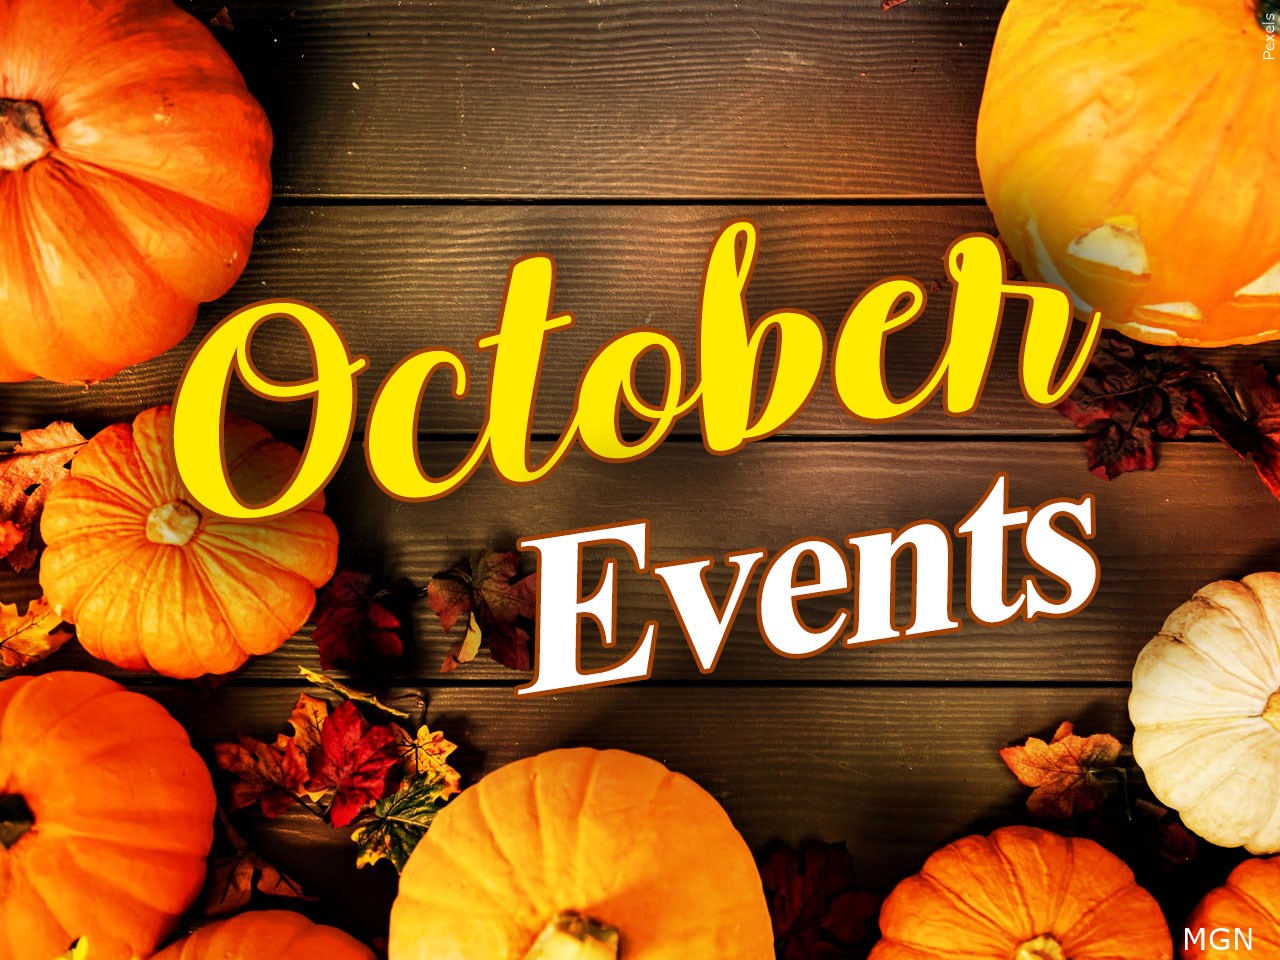 Fun Things To Do In Wilmington, NC and Surrounding Areas This Fall and  Halloween